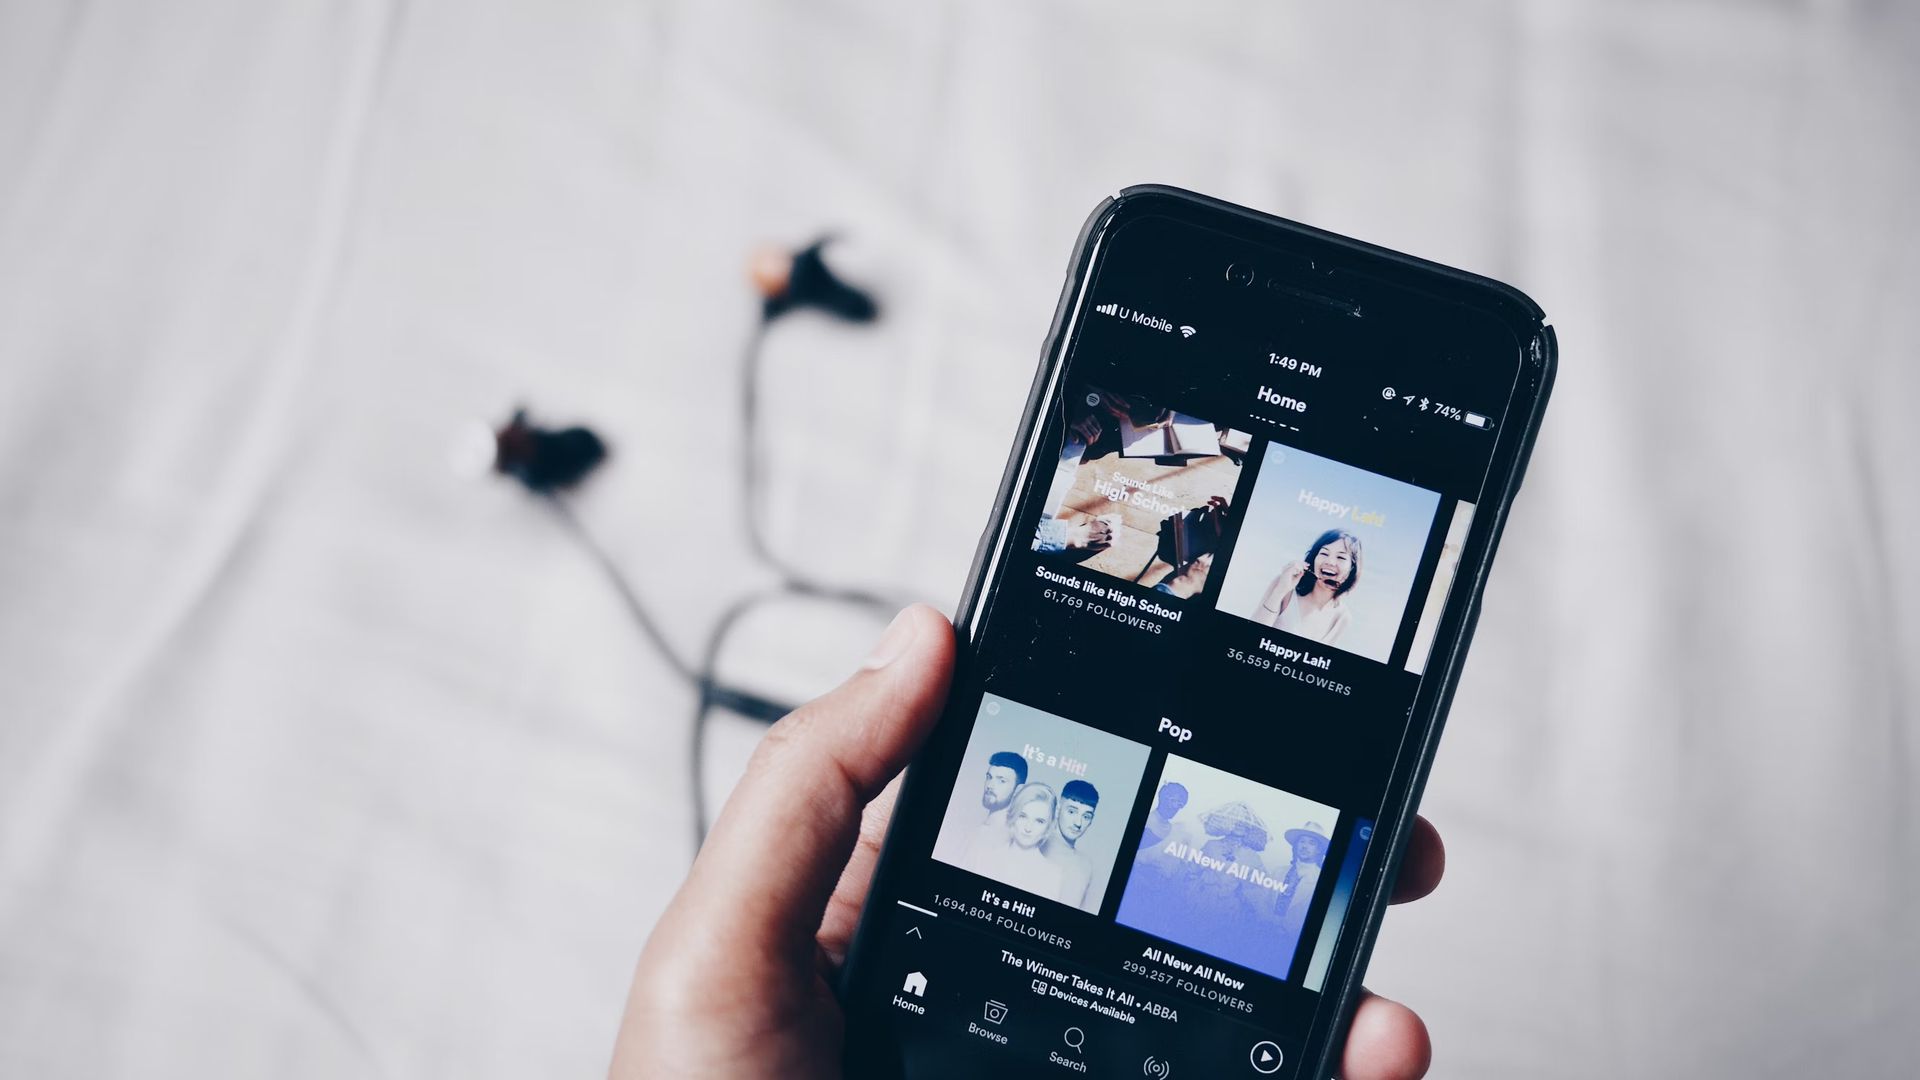 Spotify’s Discover Weekly is not updated for some users